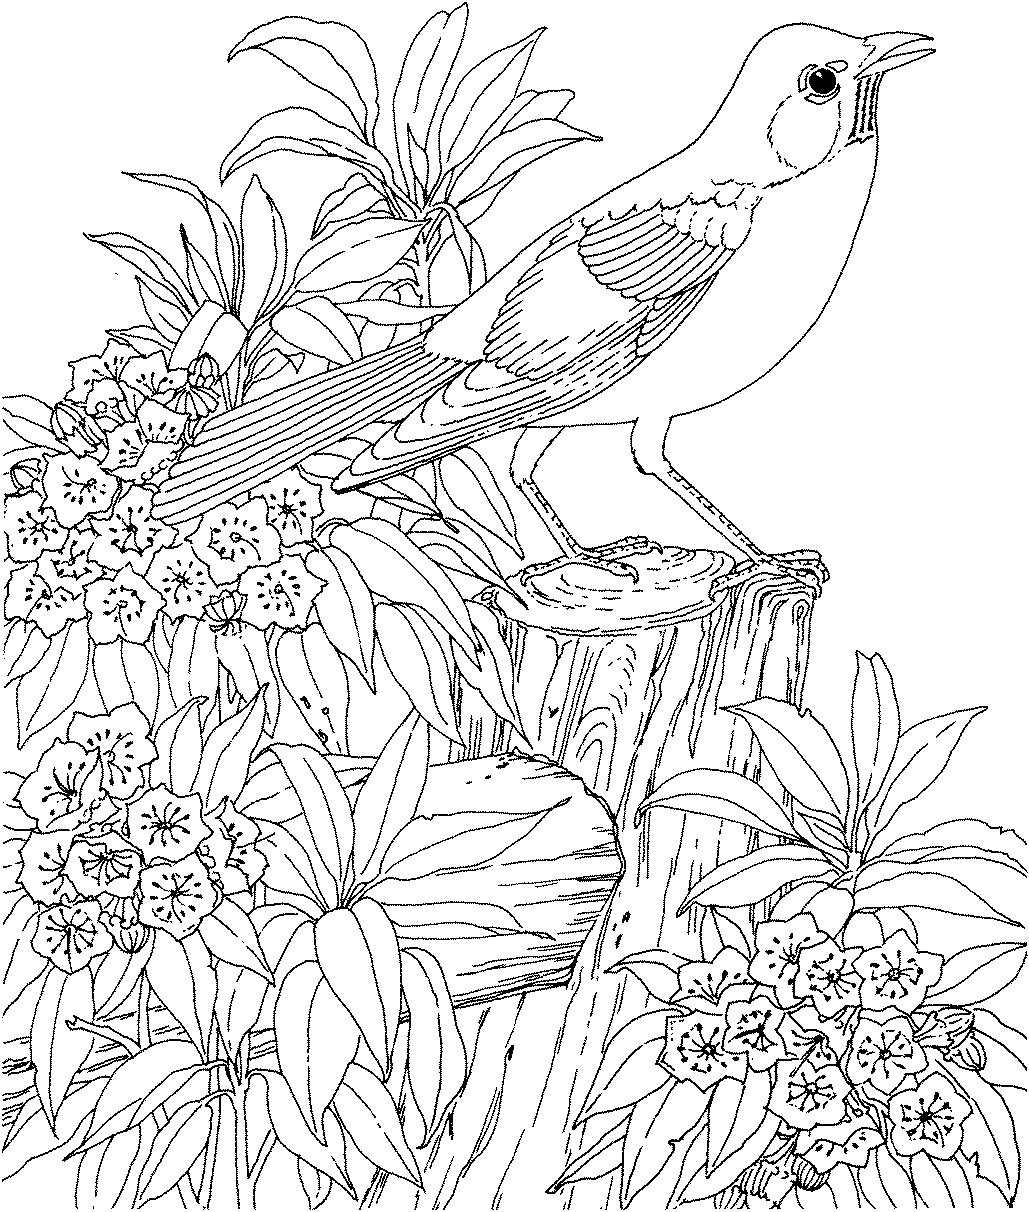 Funny Adult coloring page for kids